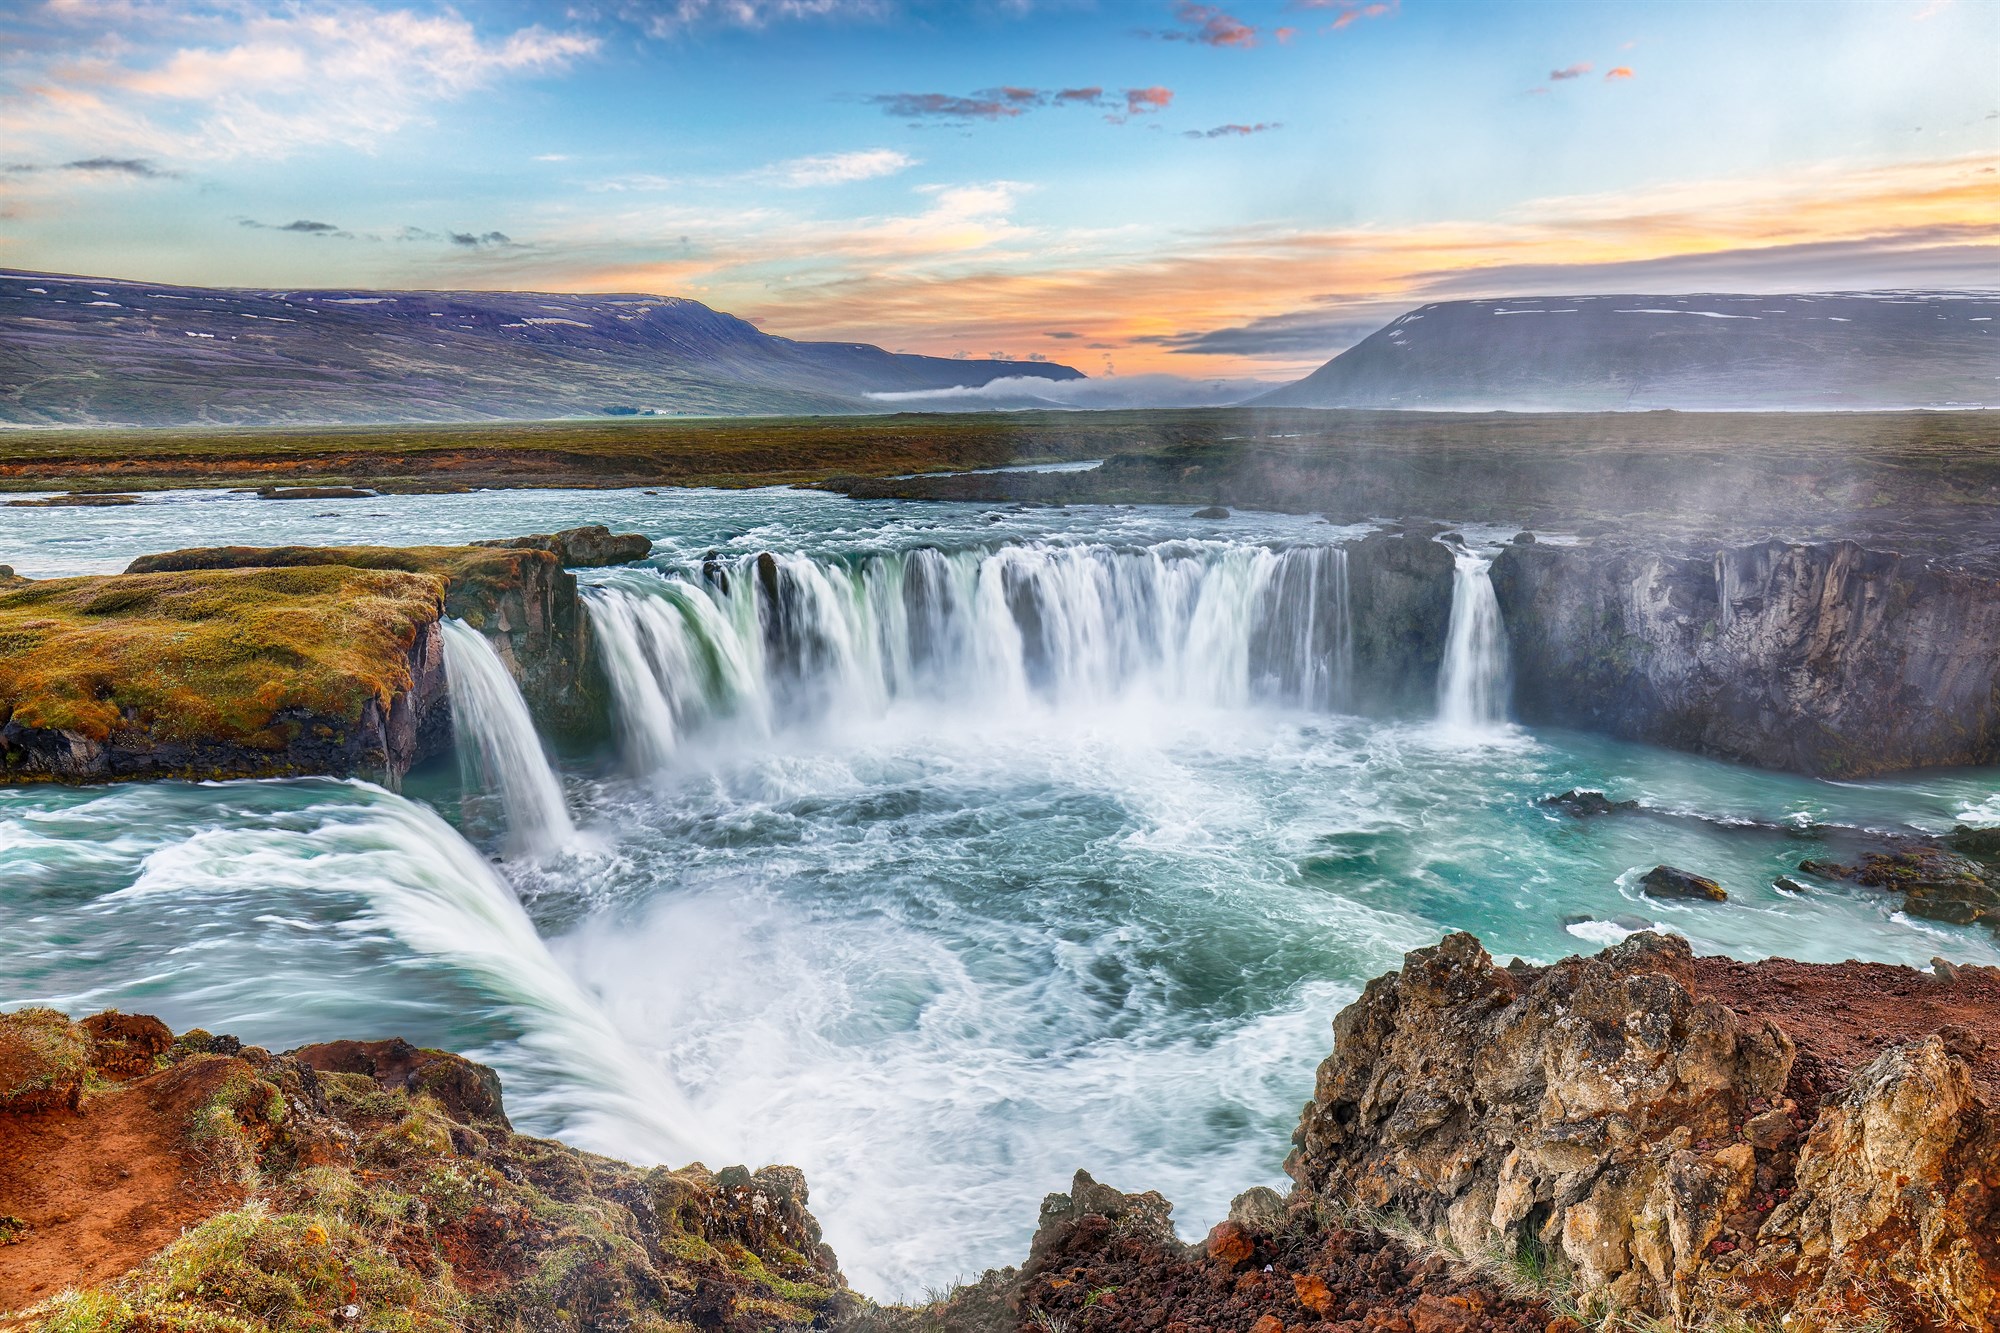 Godafoss waterfall in north Iceland.